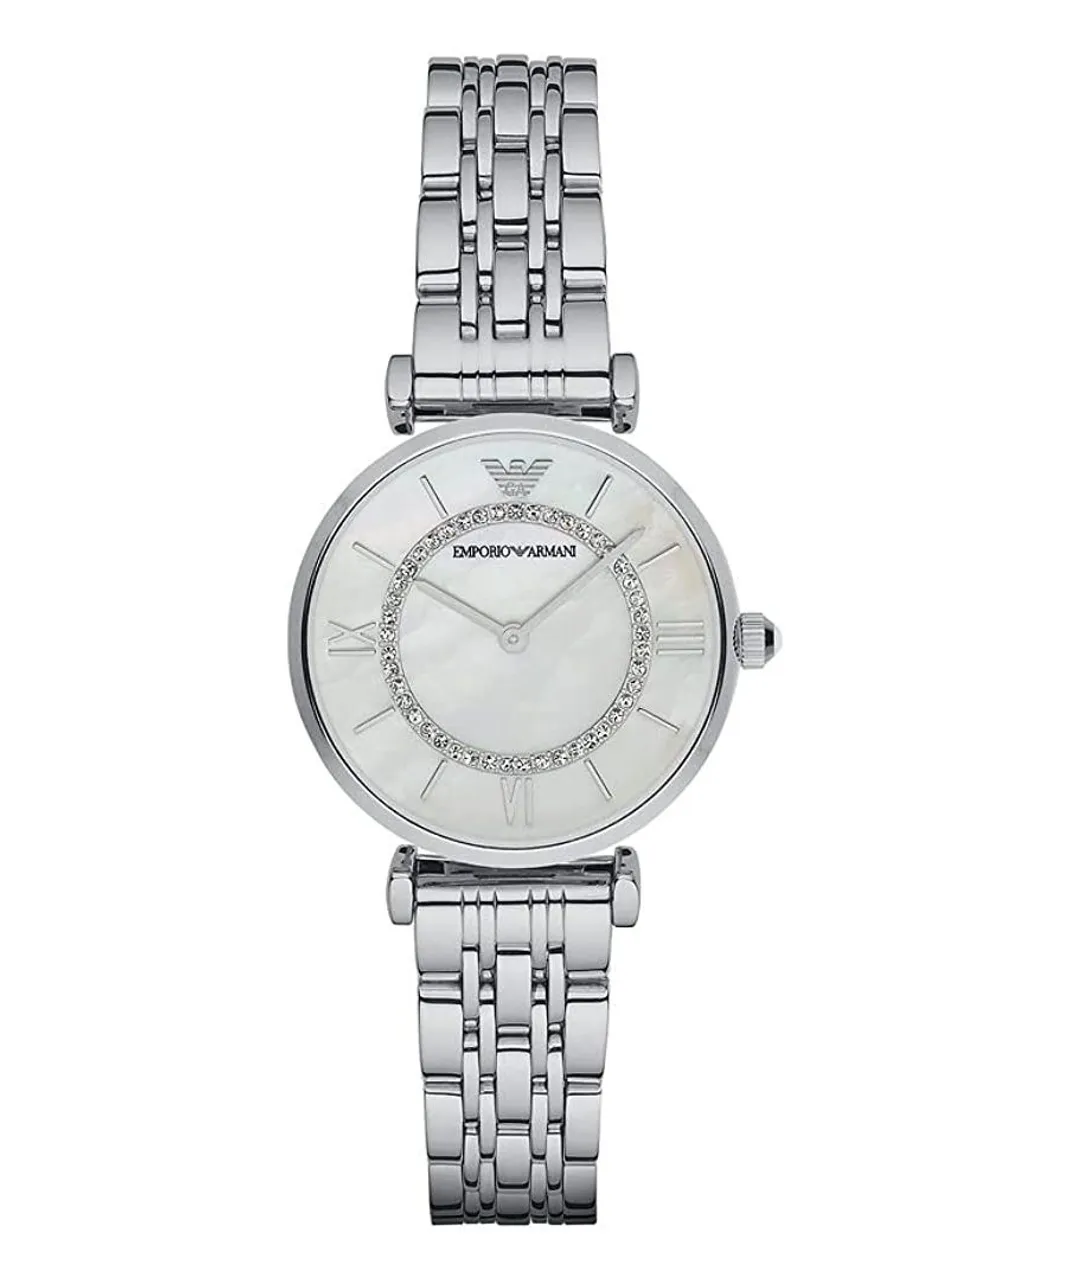 Emporio Armani Gianni T-bar WoMens Silver Watch AR1908 Stainless Steel (archived) - One Size